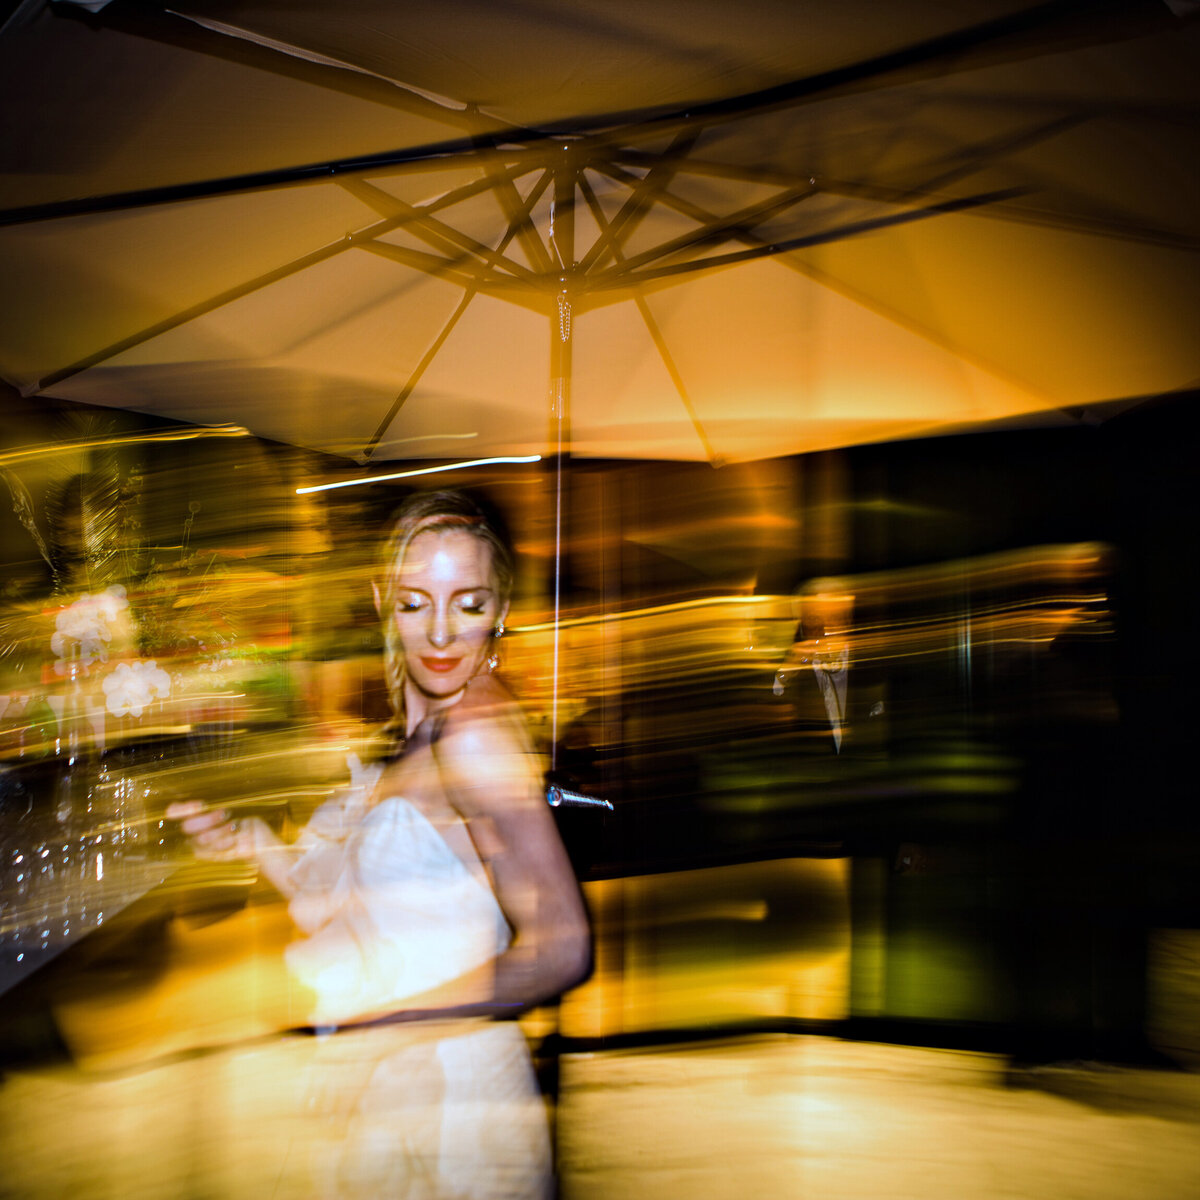 Blurry image of bride dancing at wedding reception